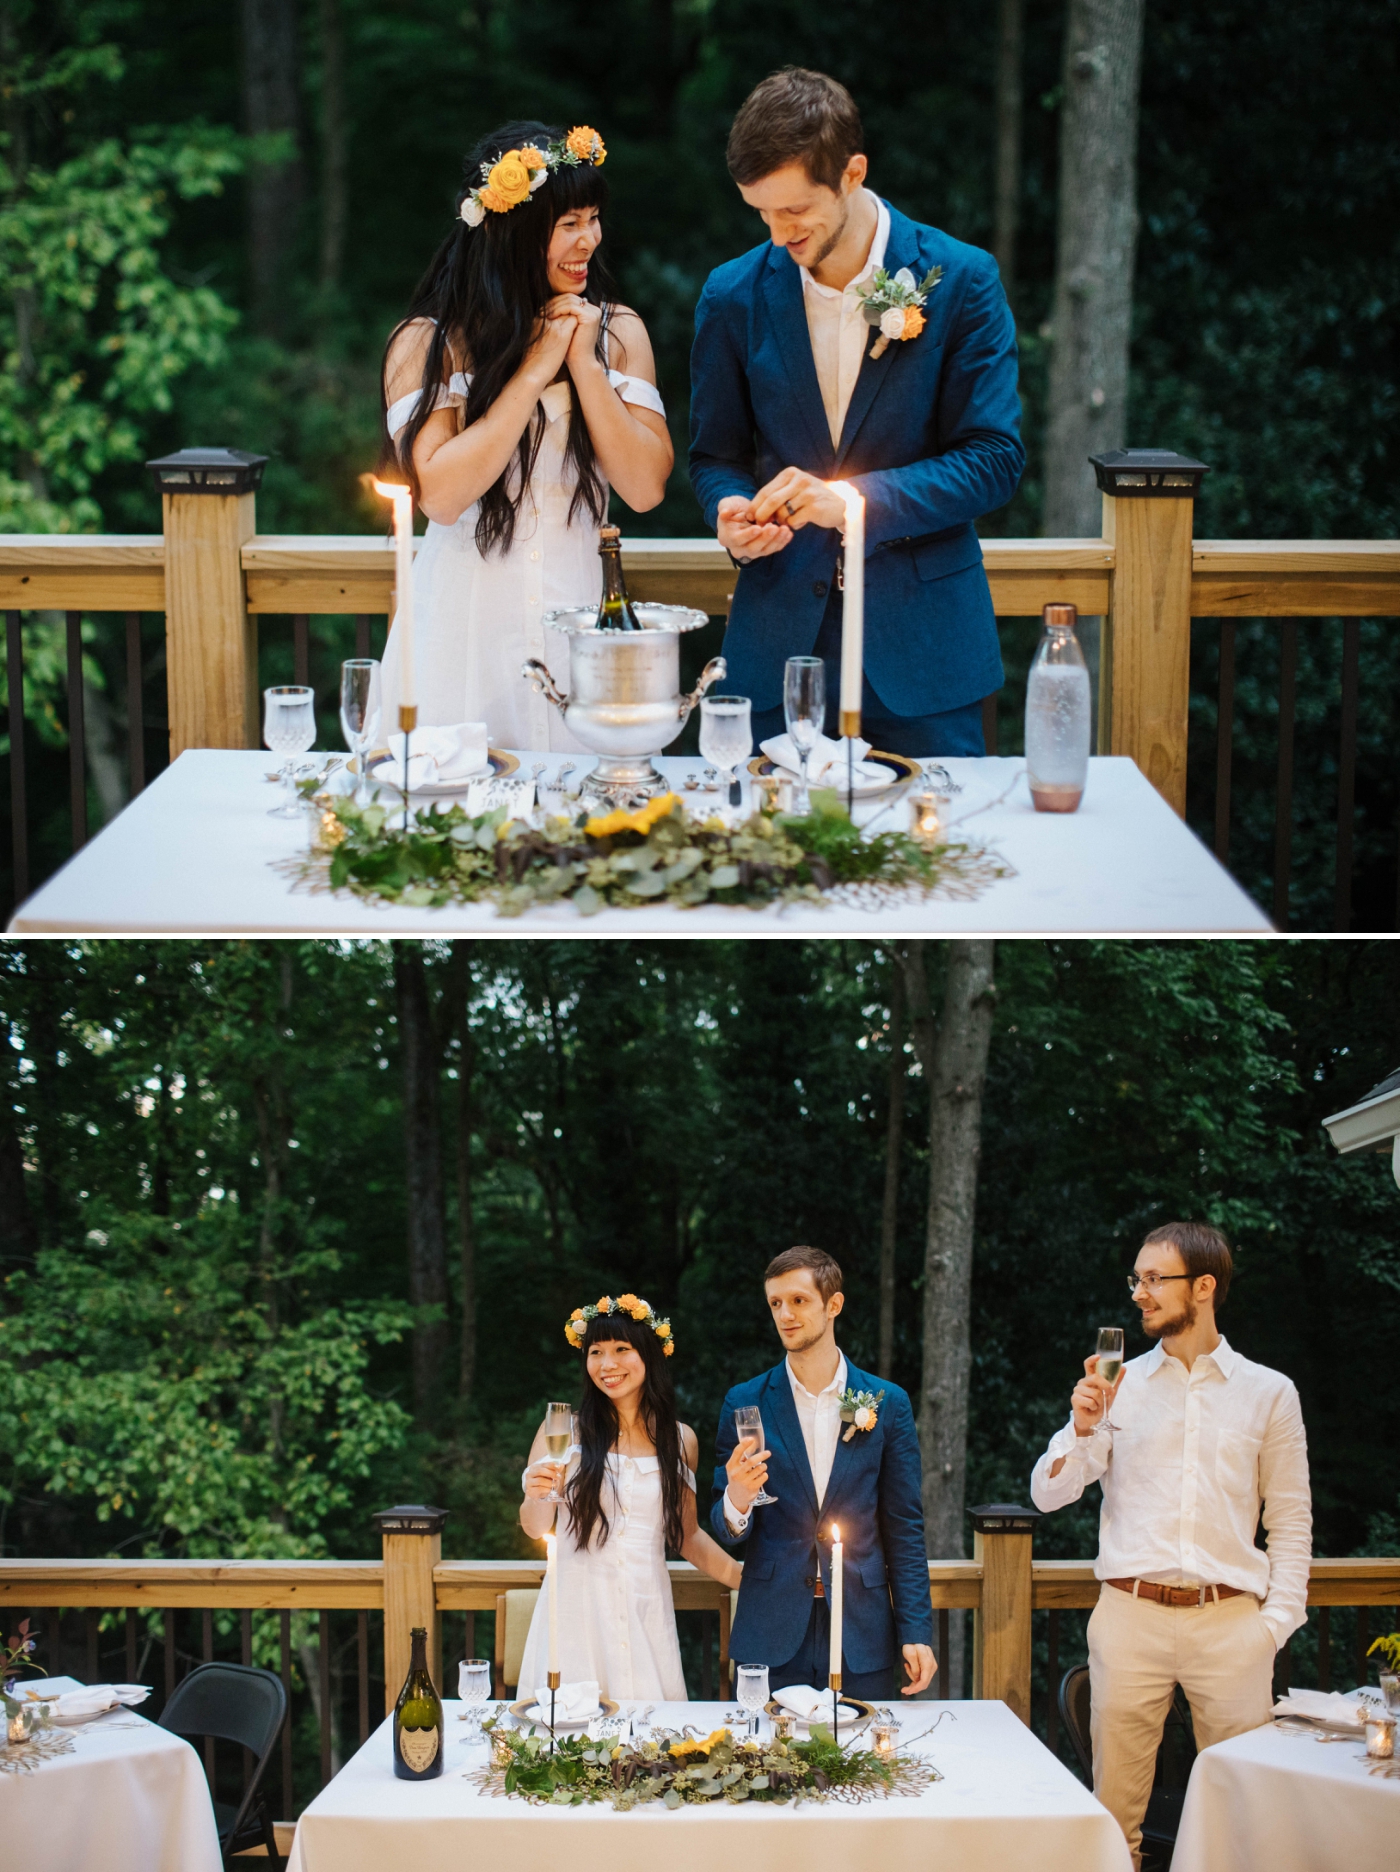 Atlanta elopement photography by Izzy and Co.